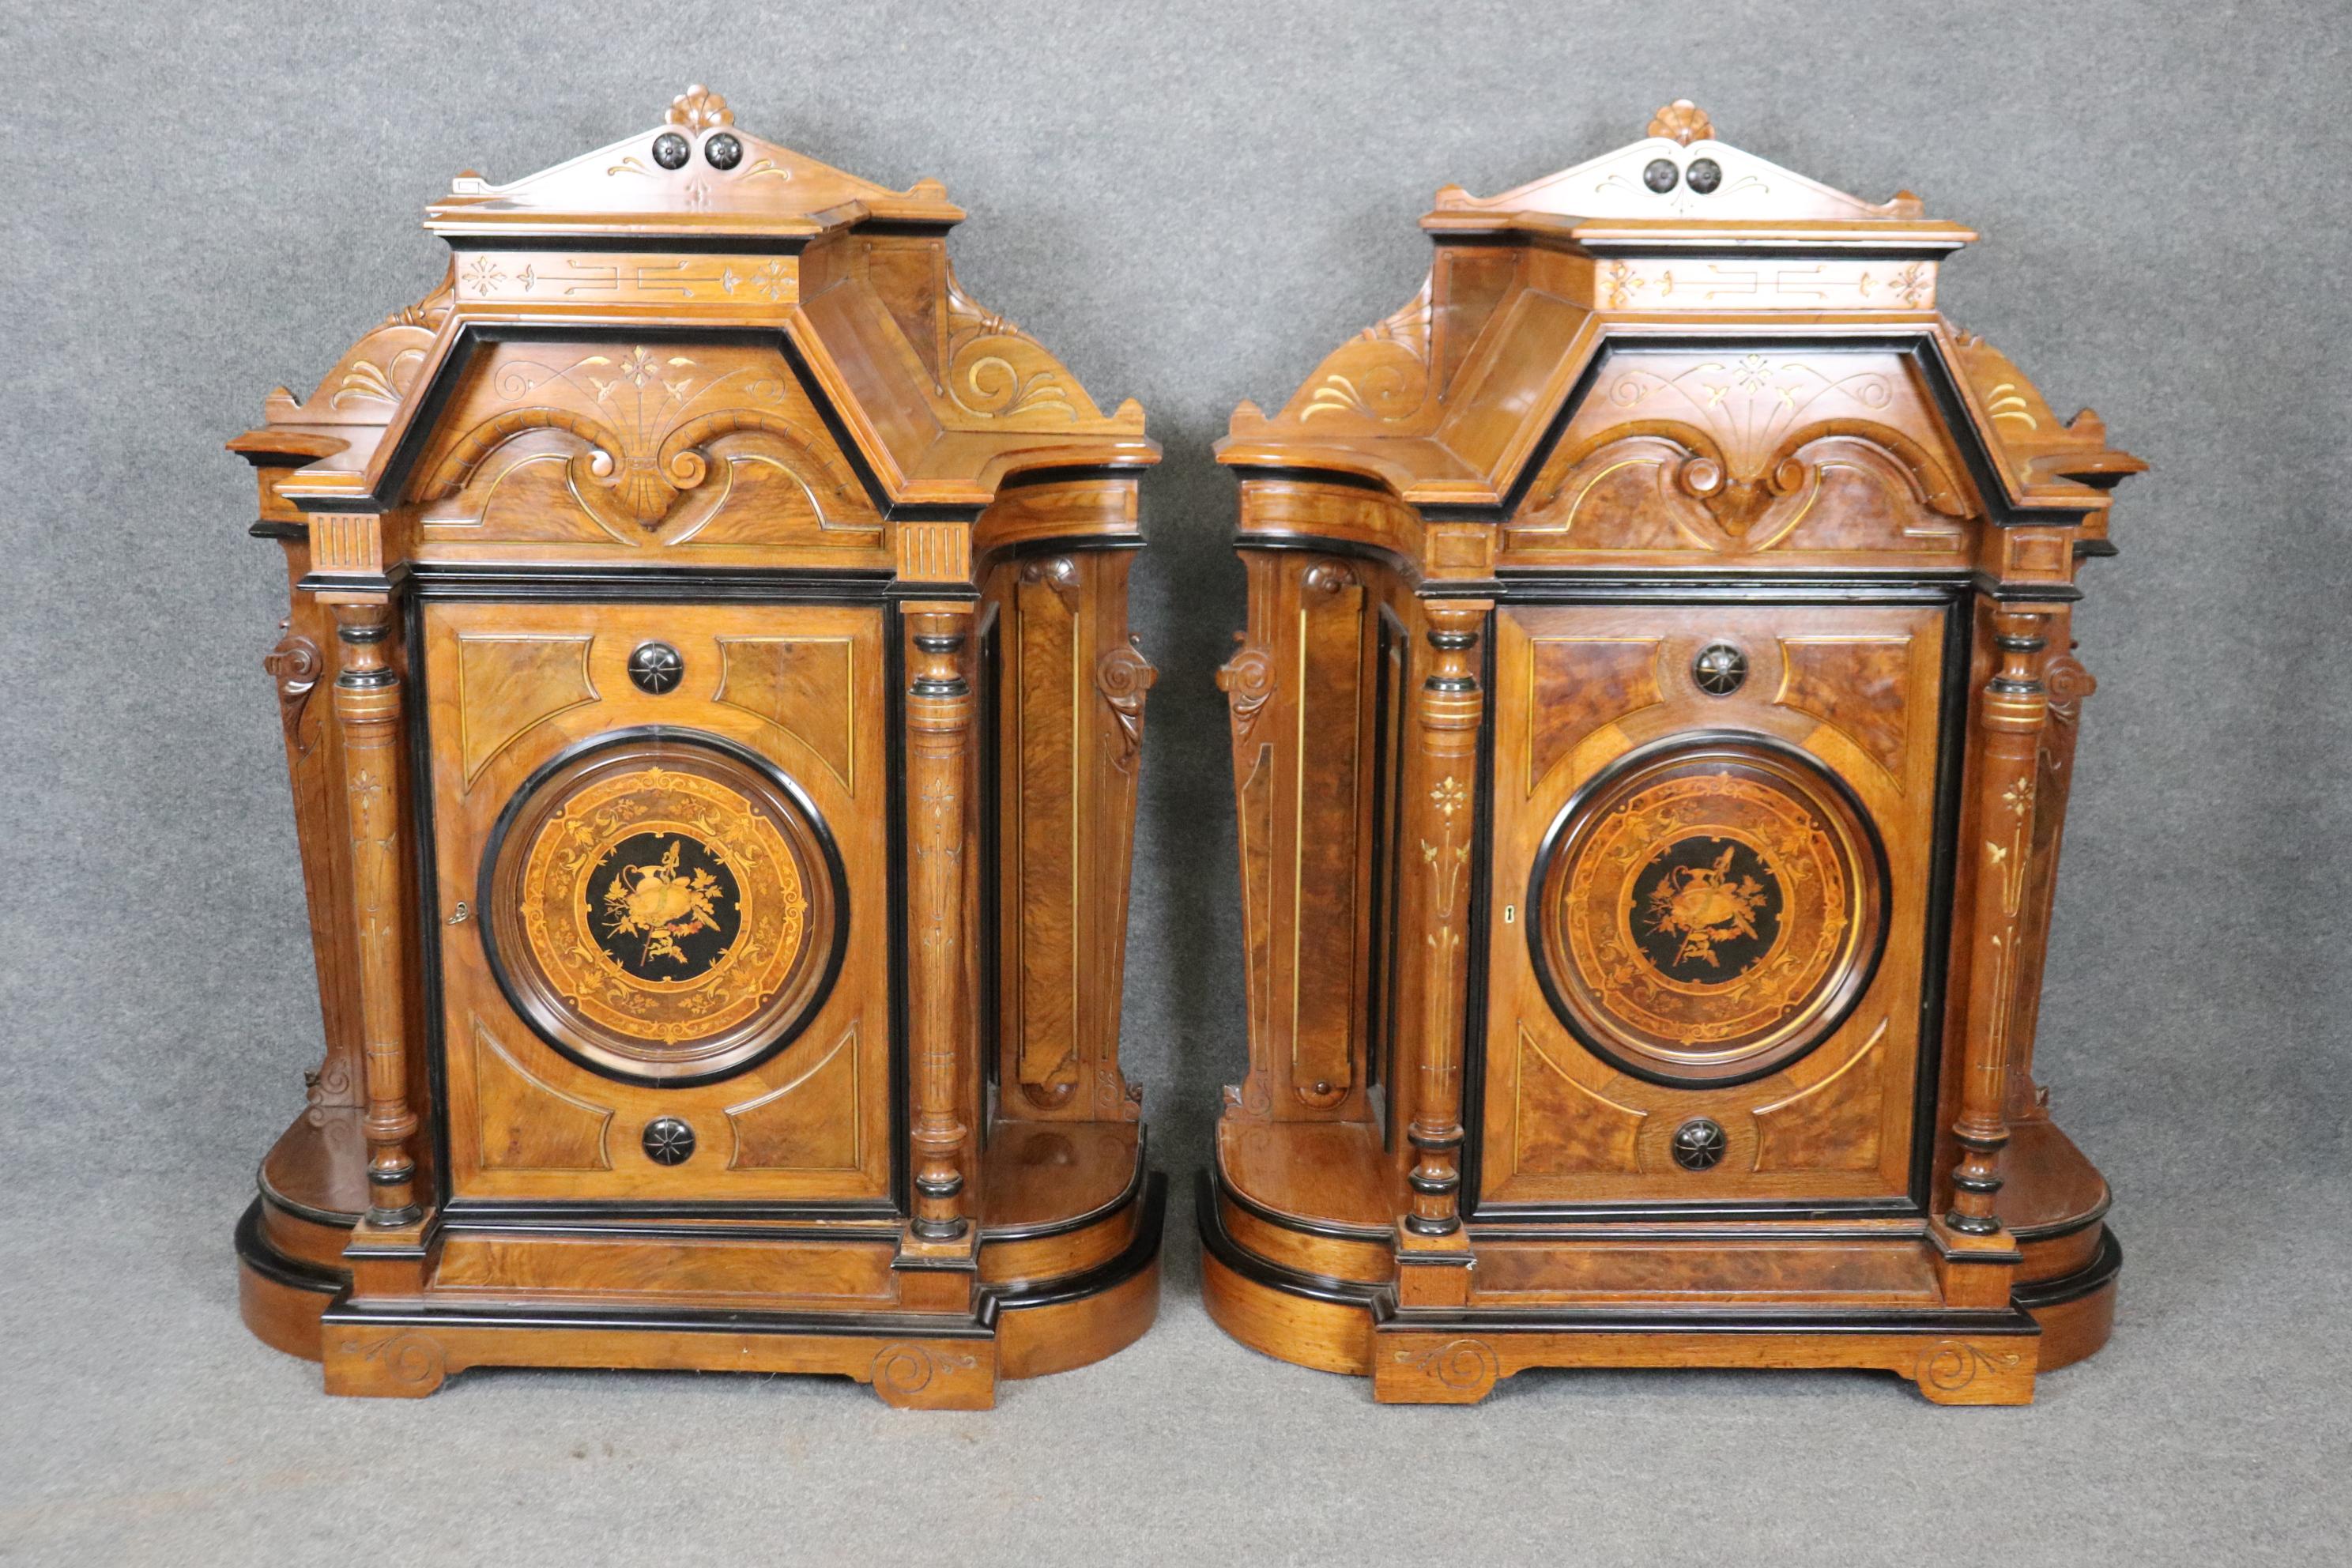 Rare Pair of American Renaissance Revival American Victorian Pedestal Cabinets  For Sale 1